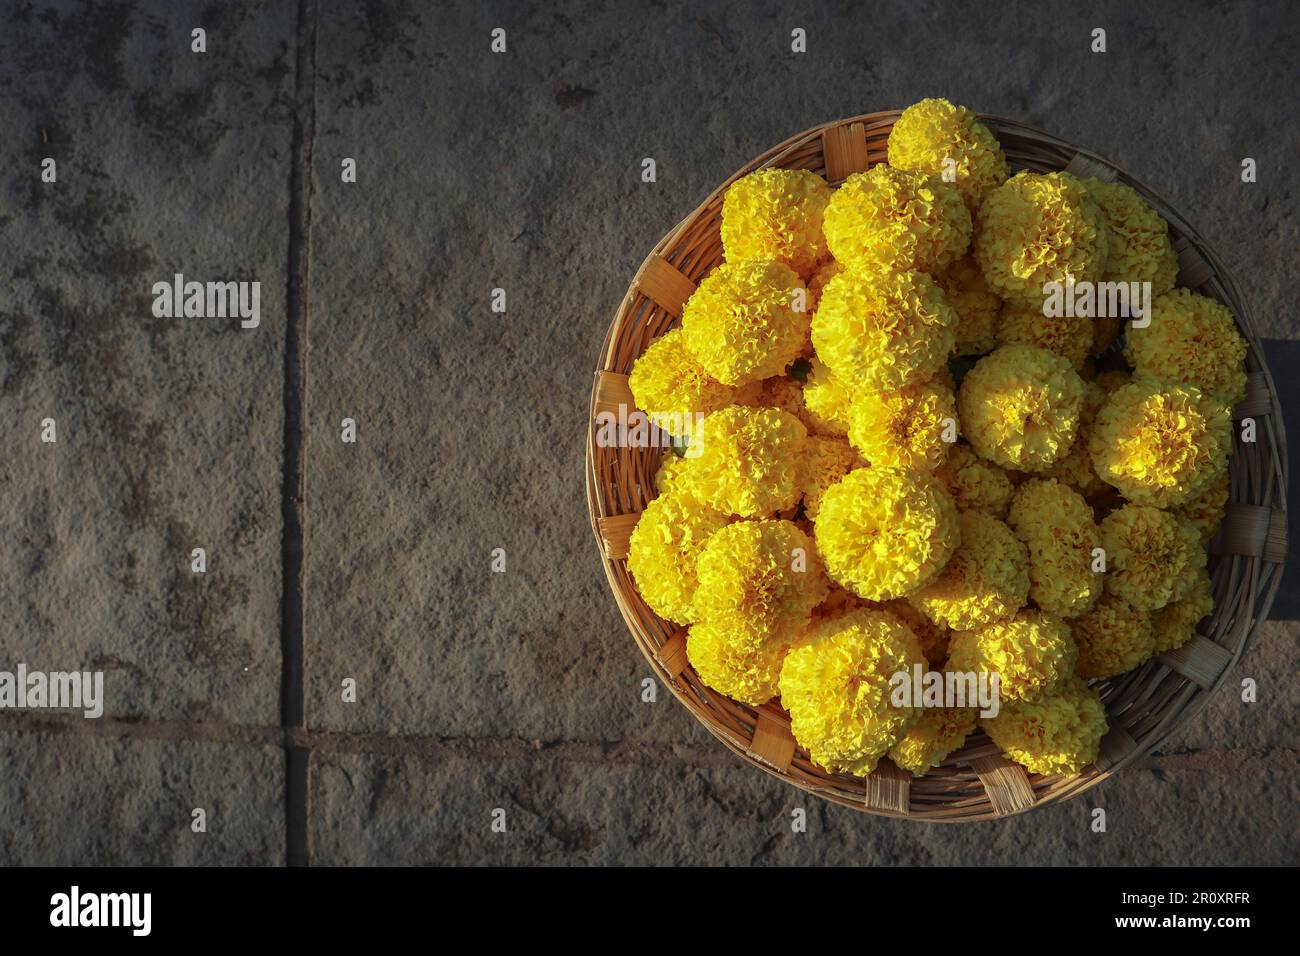 Fresh Marigold flowers bunch in wicker basket on floor background with blank space Stock Photo